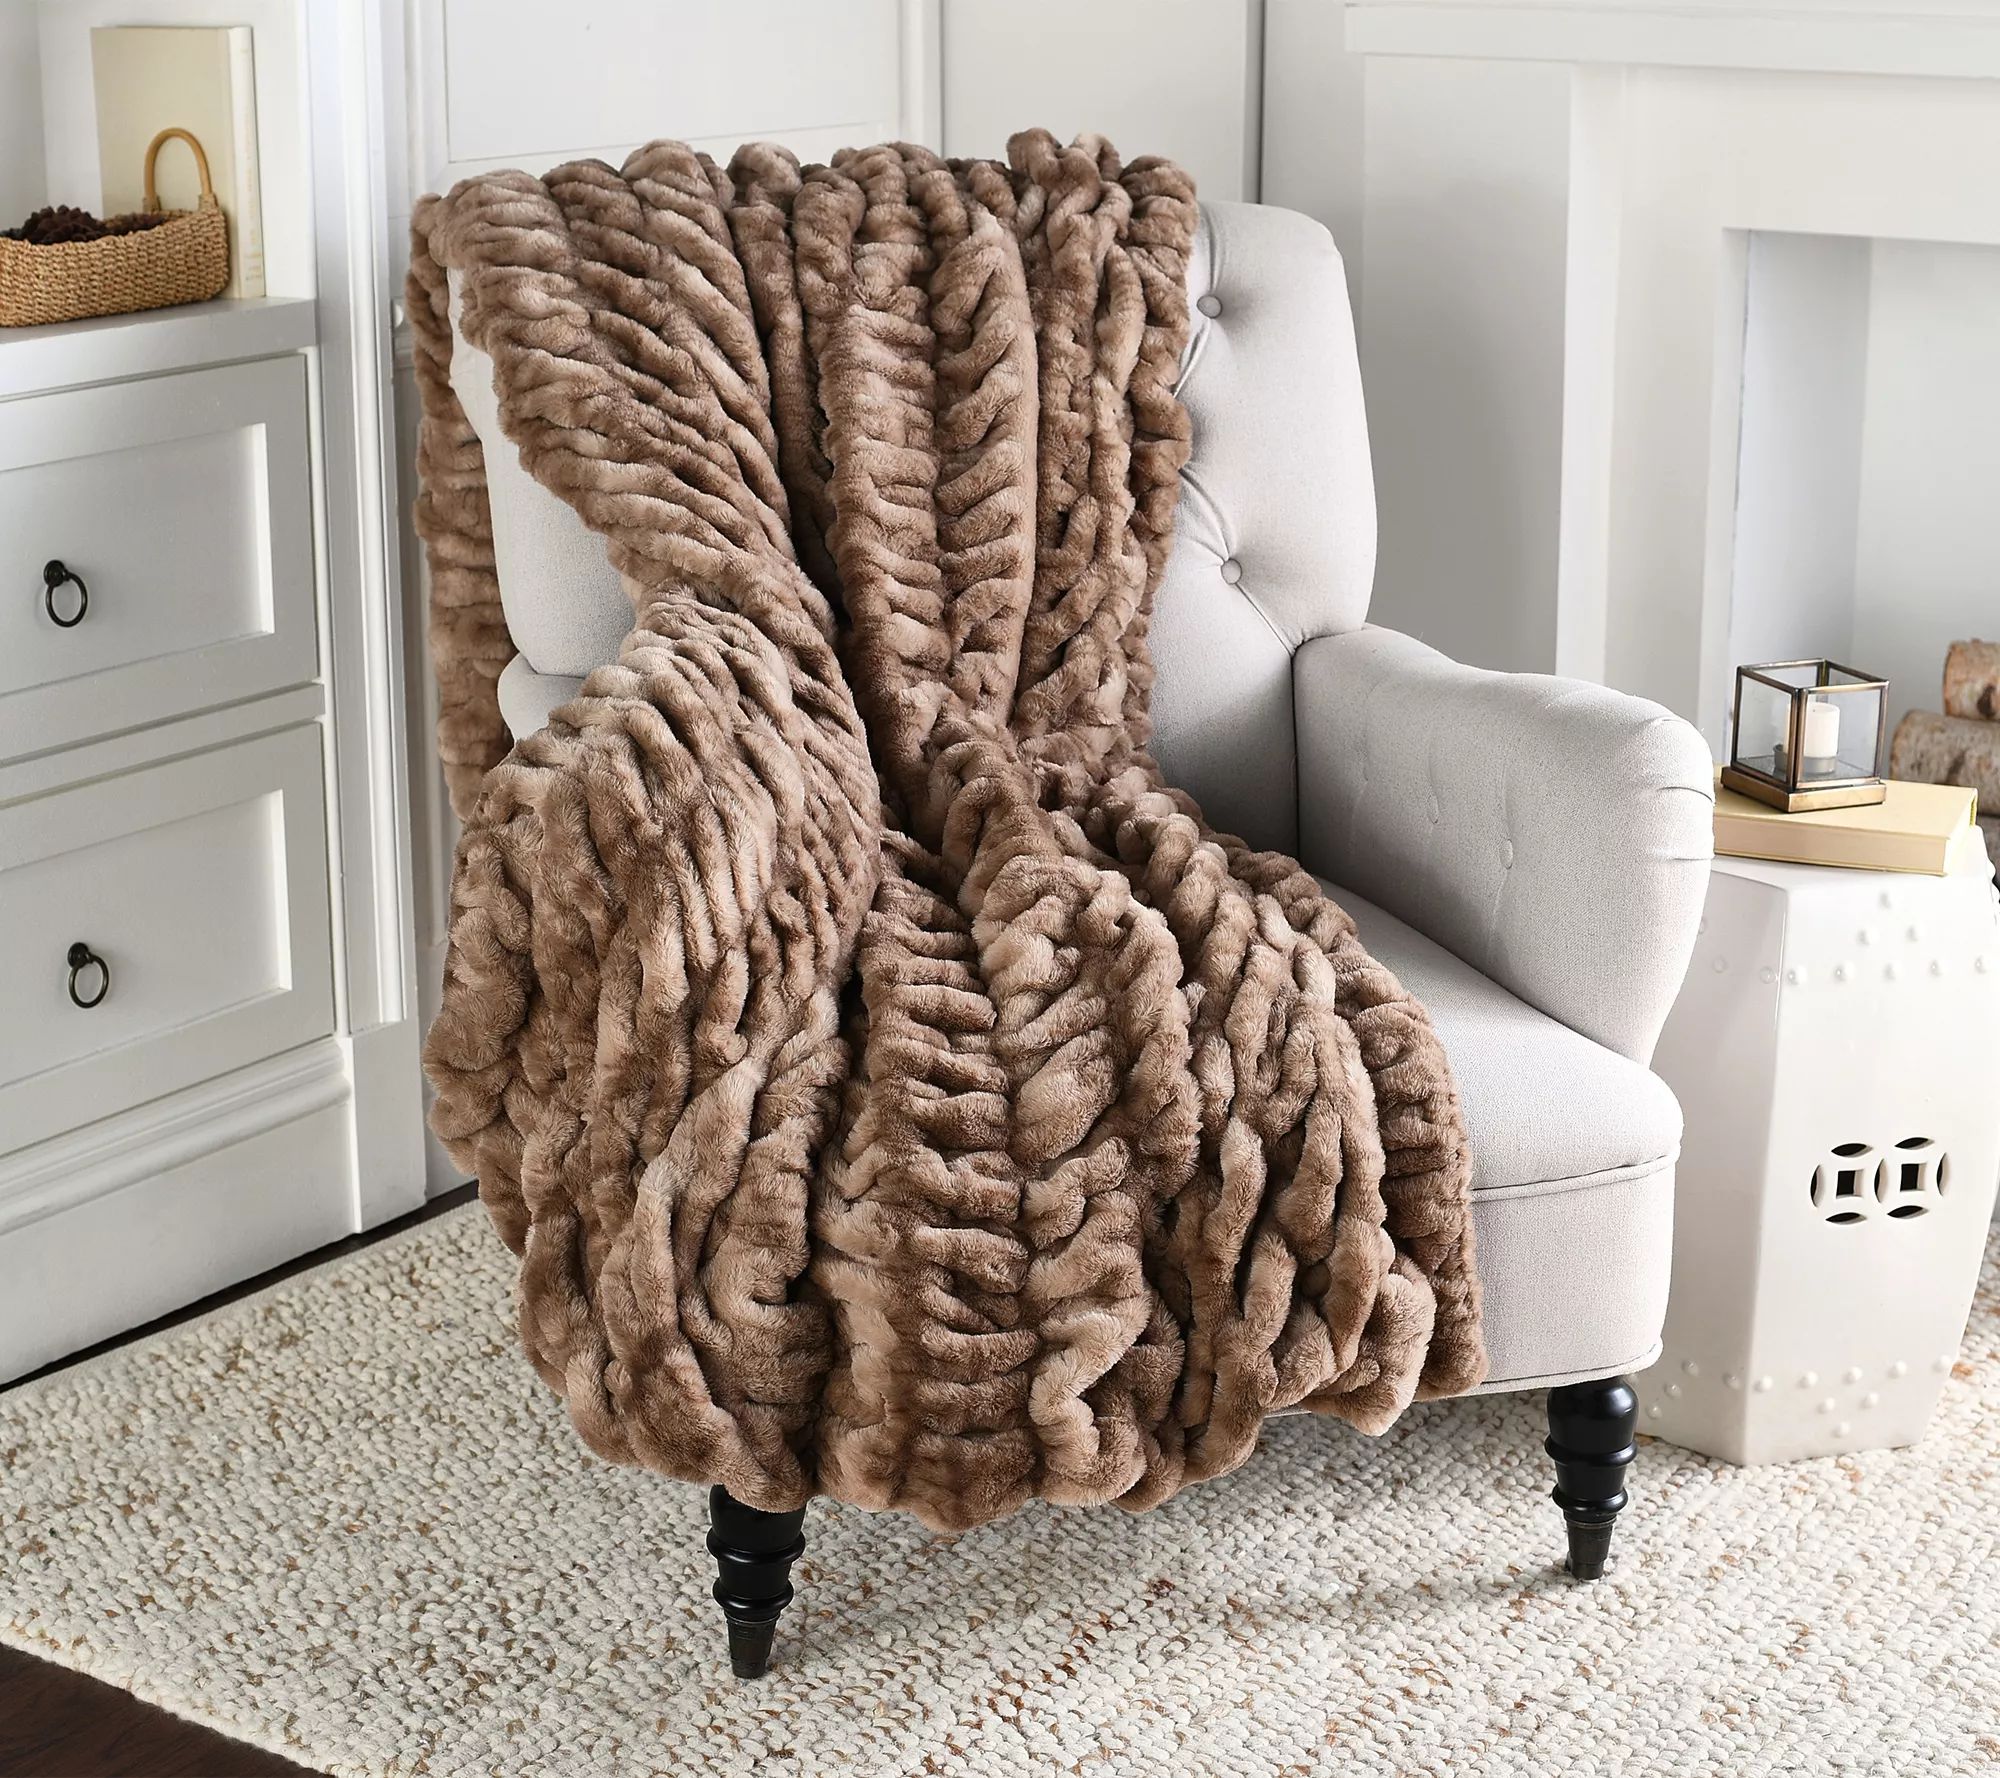 Hotel duCobb Oversized Luxury Ruched Faux Fur Throw by Dennis Basso | QVC